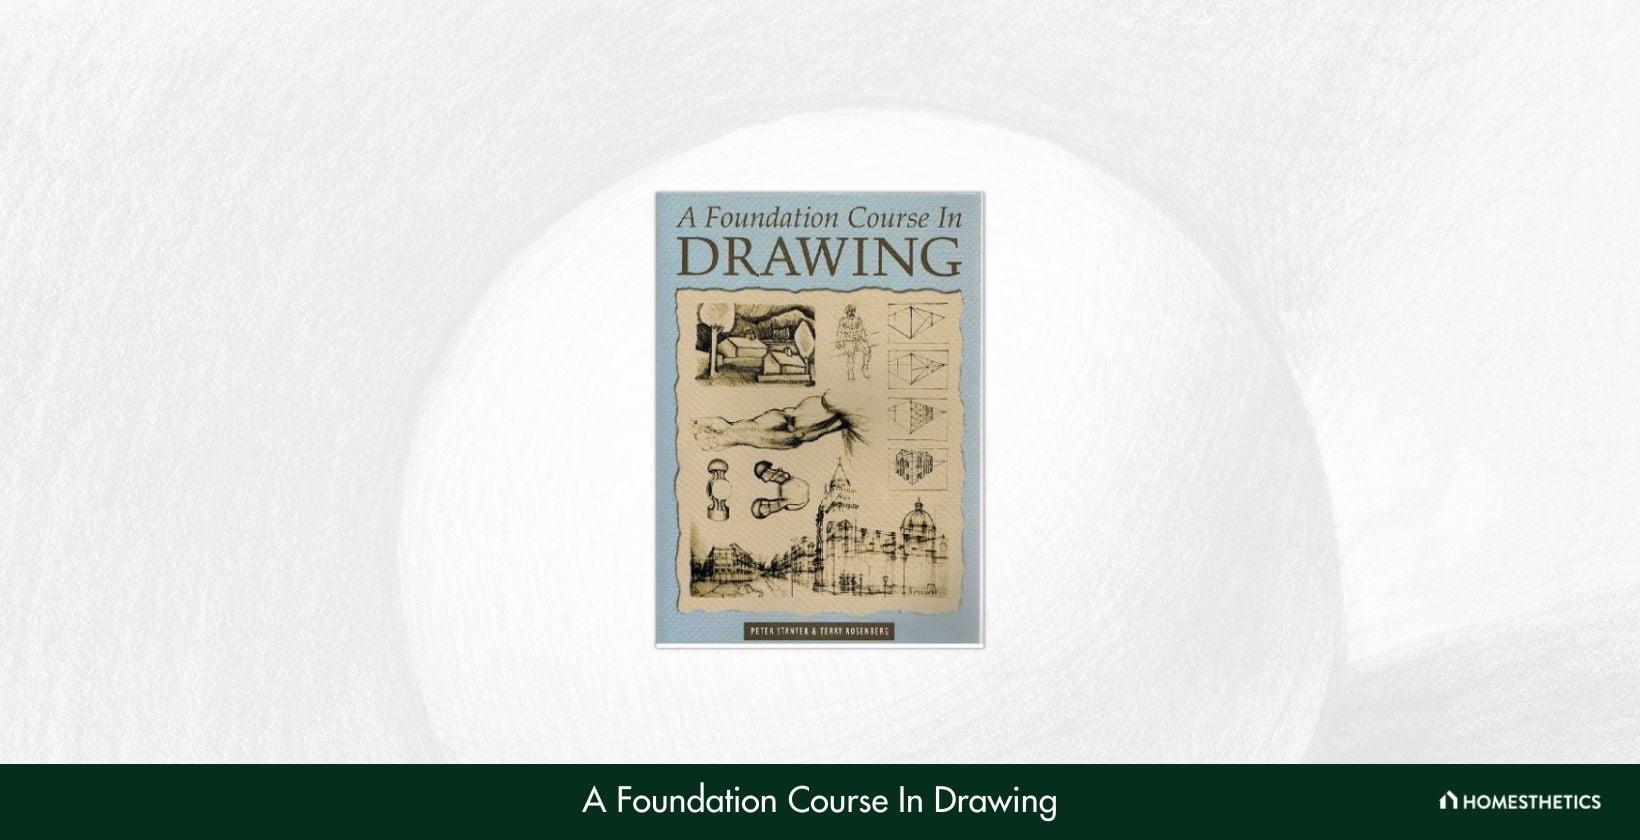 A Foundation Course In Drawing by Peter Stanyer